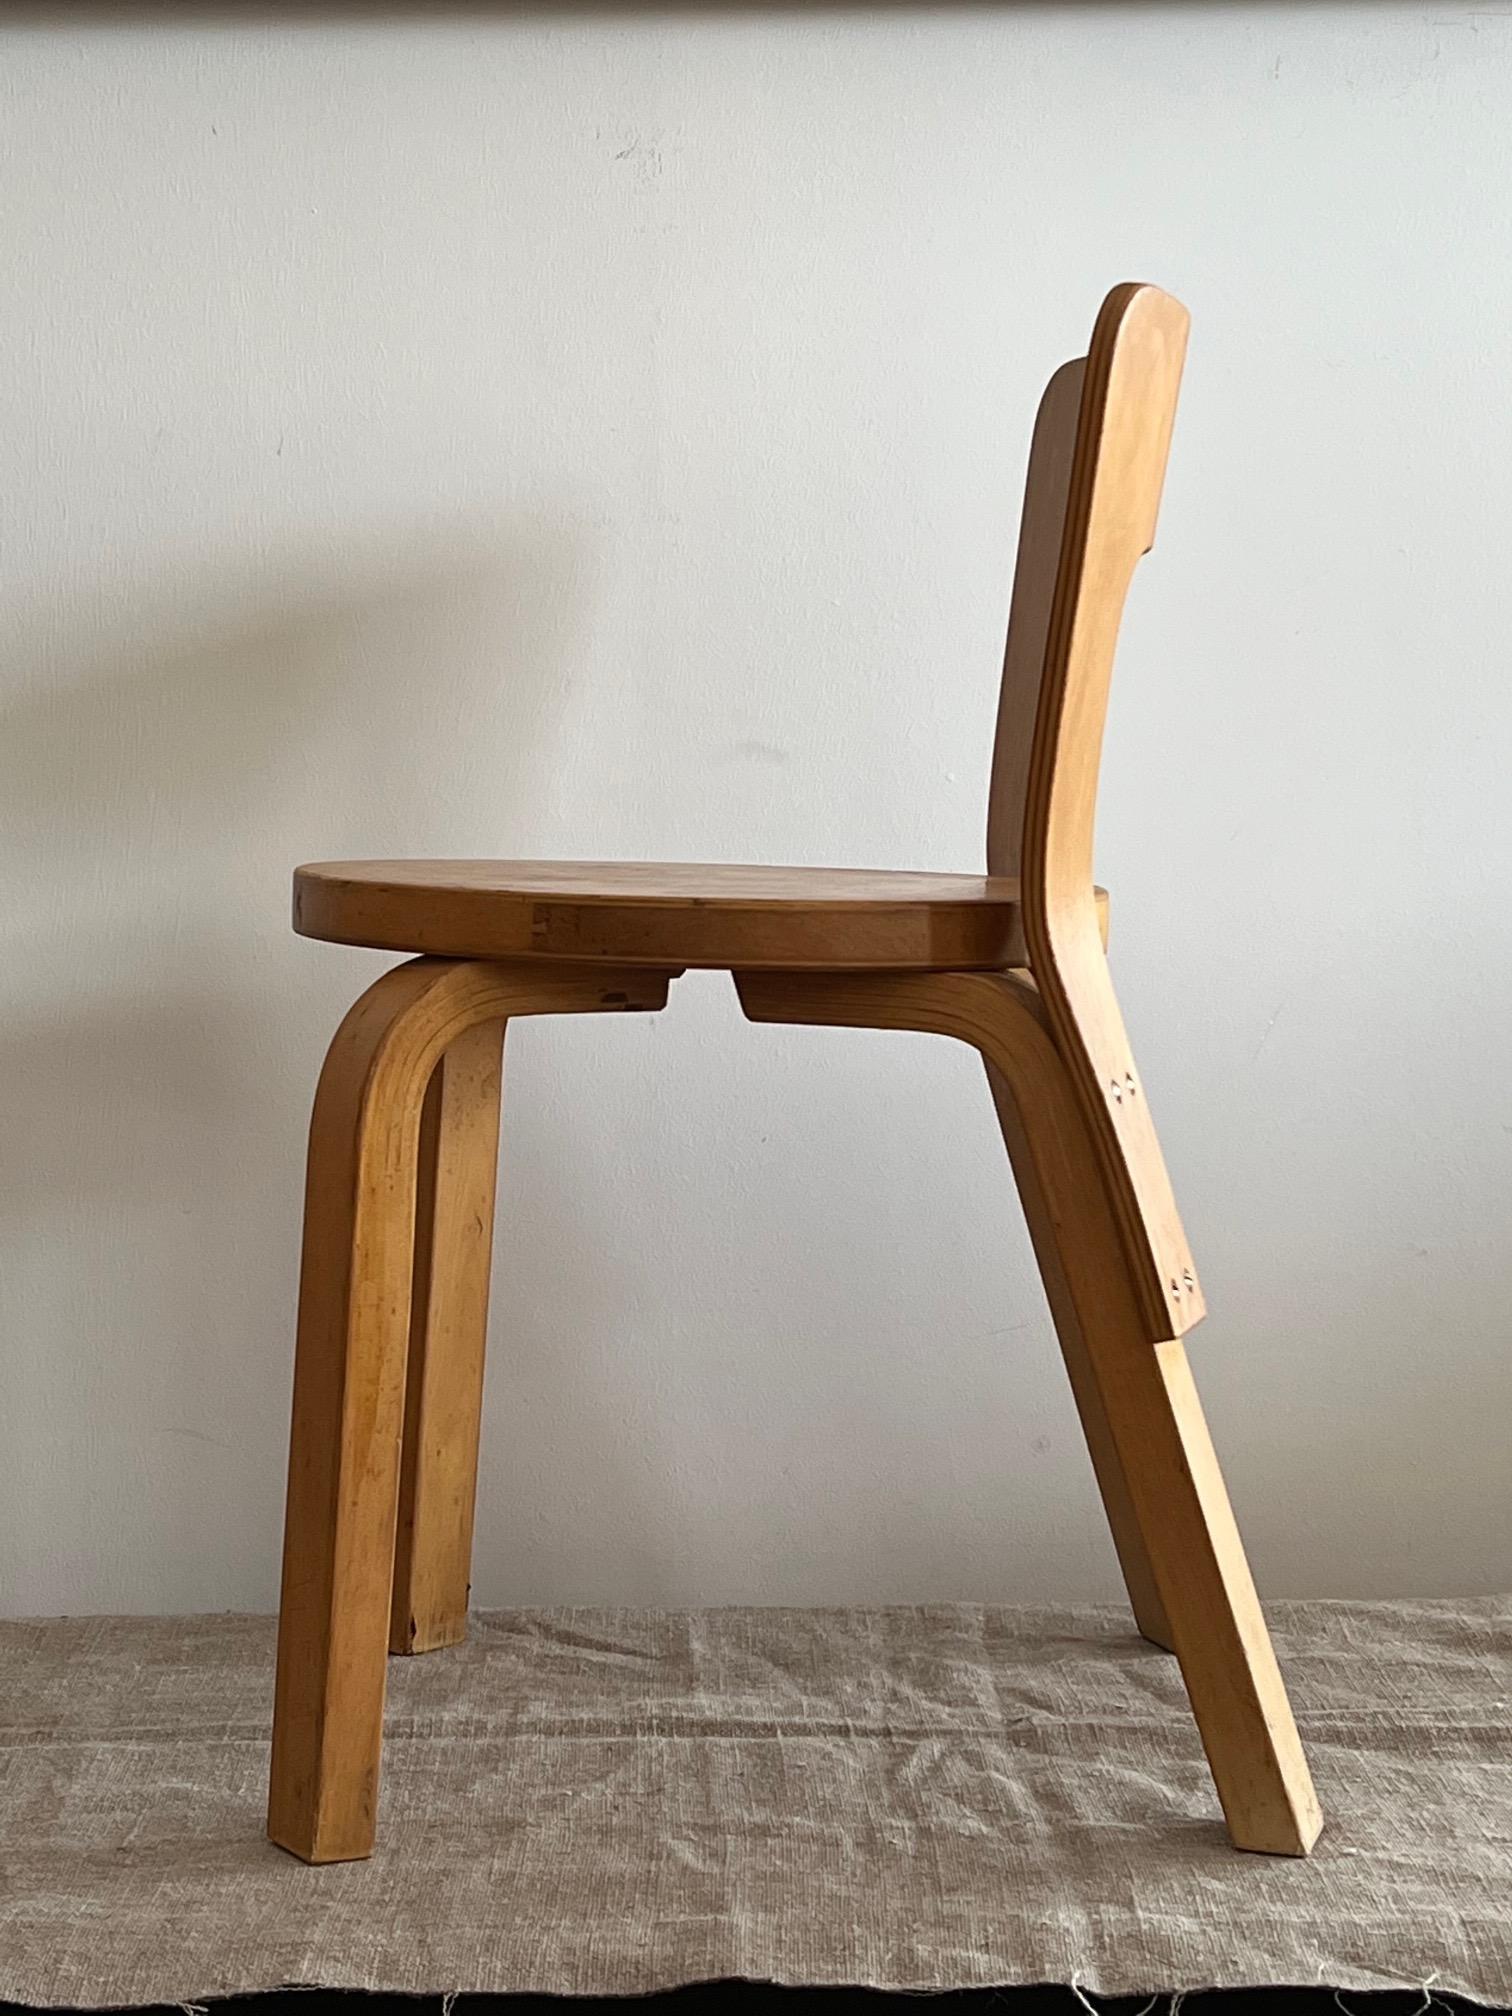 An early and beautiful Alvar Aalto child's chair with great patina. Also known as a N65 bentwood chair.